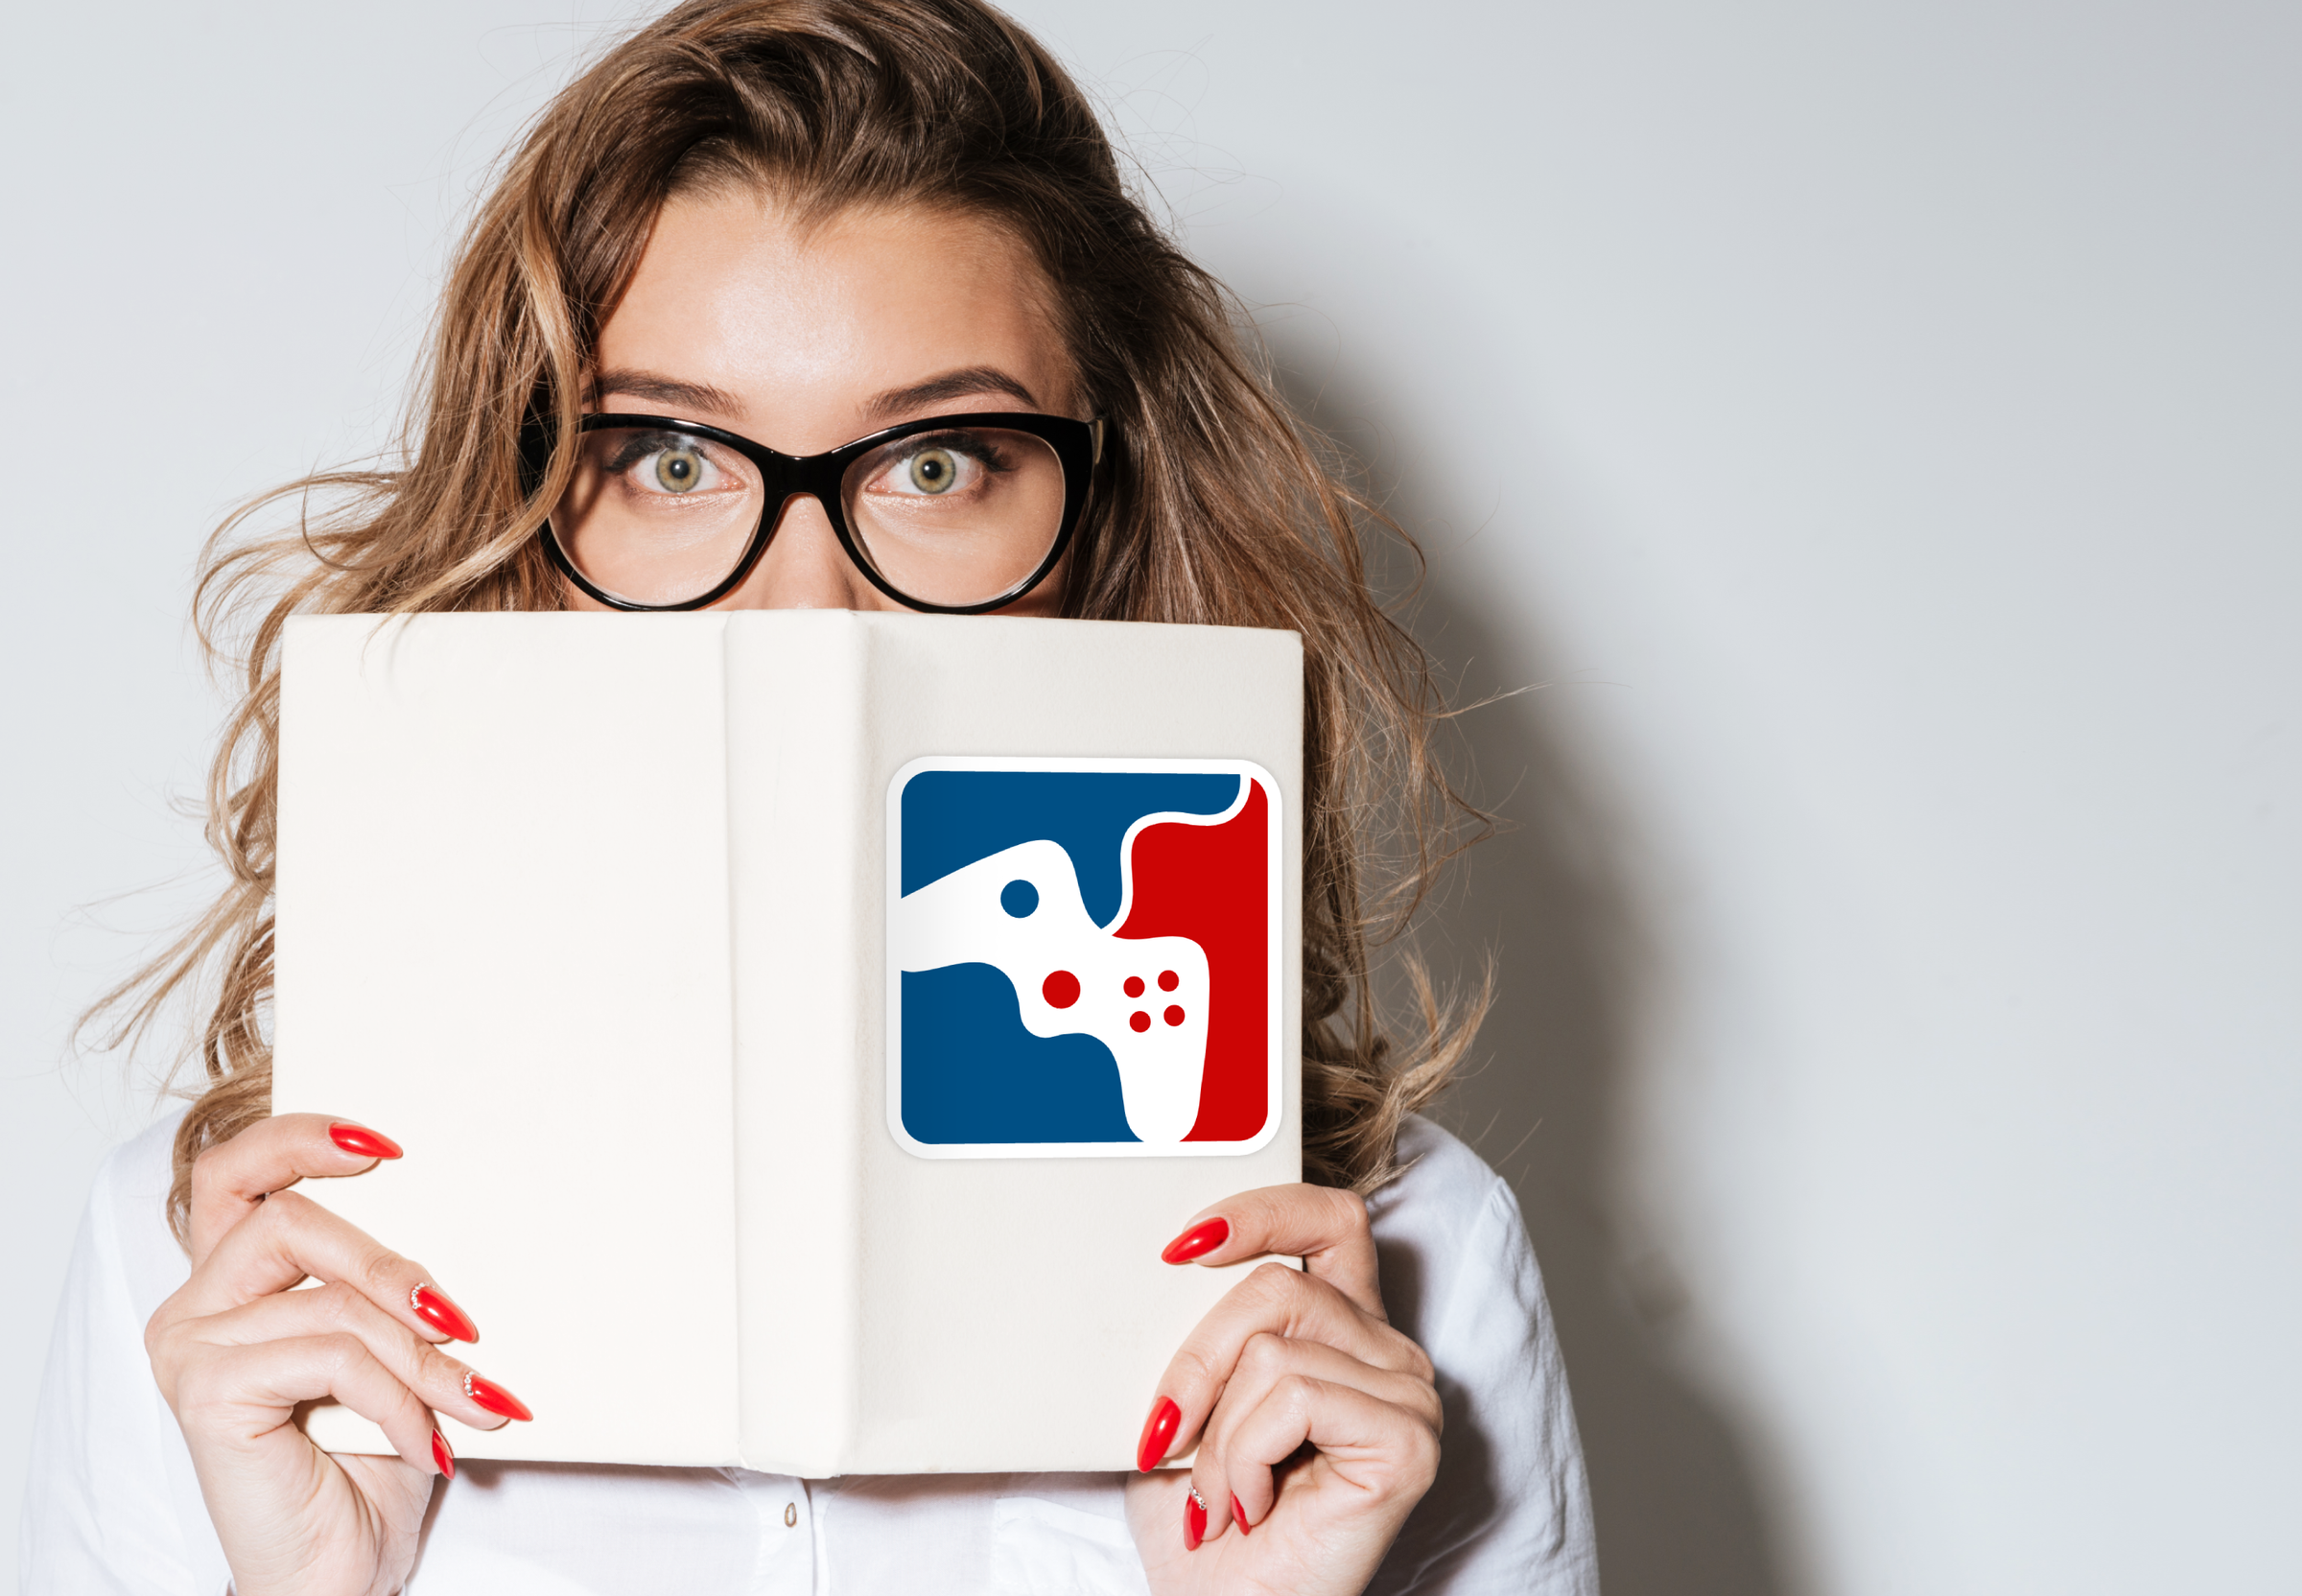 A white women with glasses is holding an open offwhite journal in front of her face. The journal has a square design in red, blue, and white that parodies a sports logo but with a video game controller. She stands in front of a white wall.